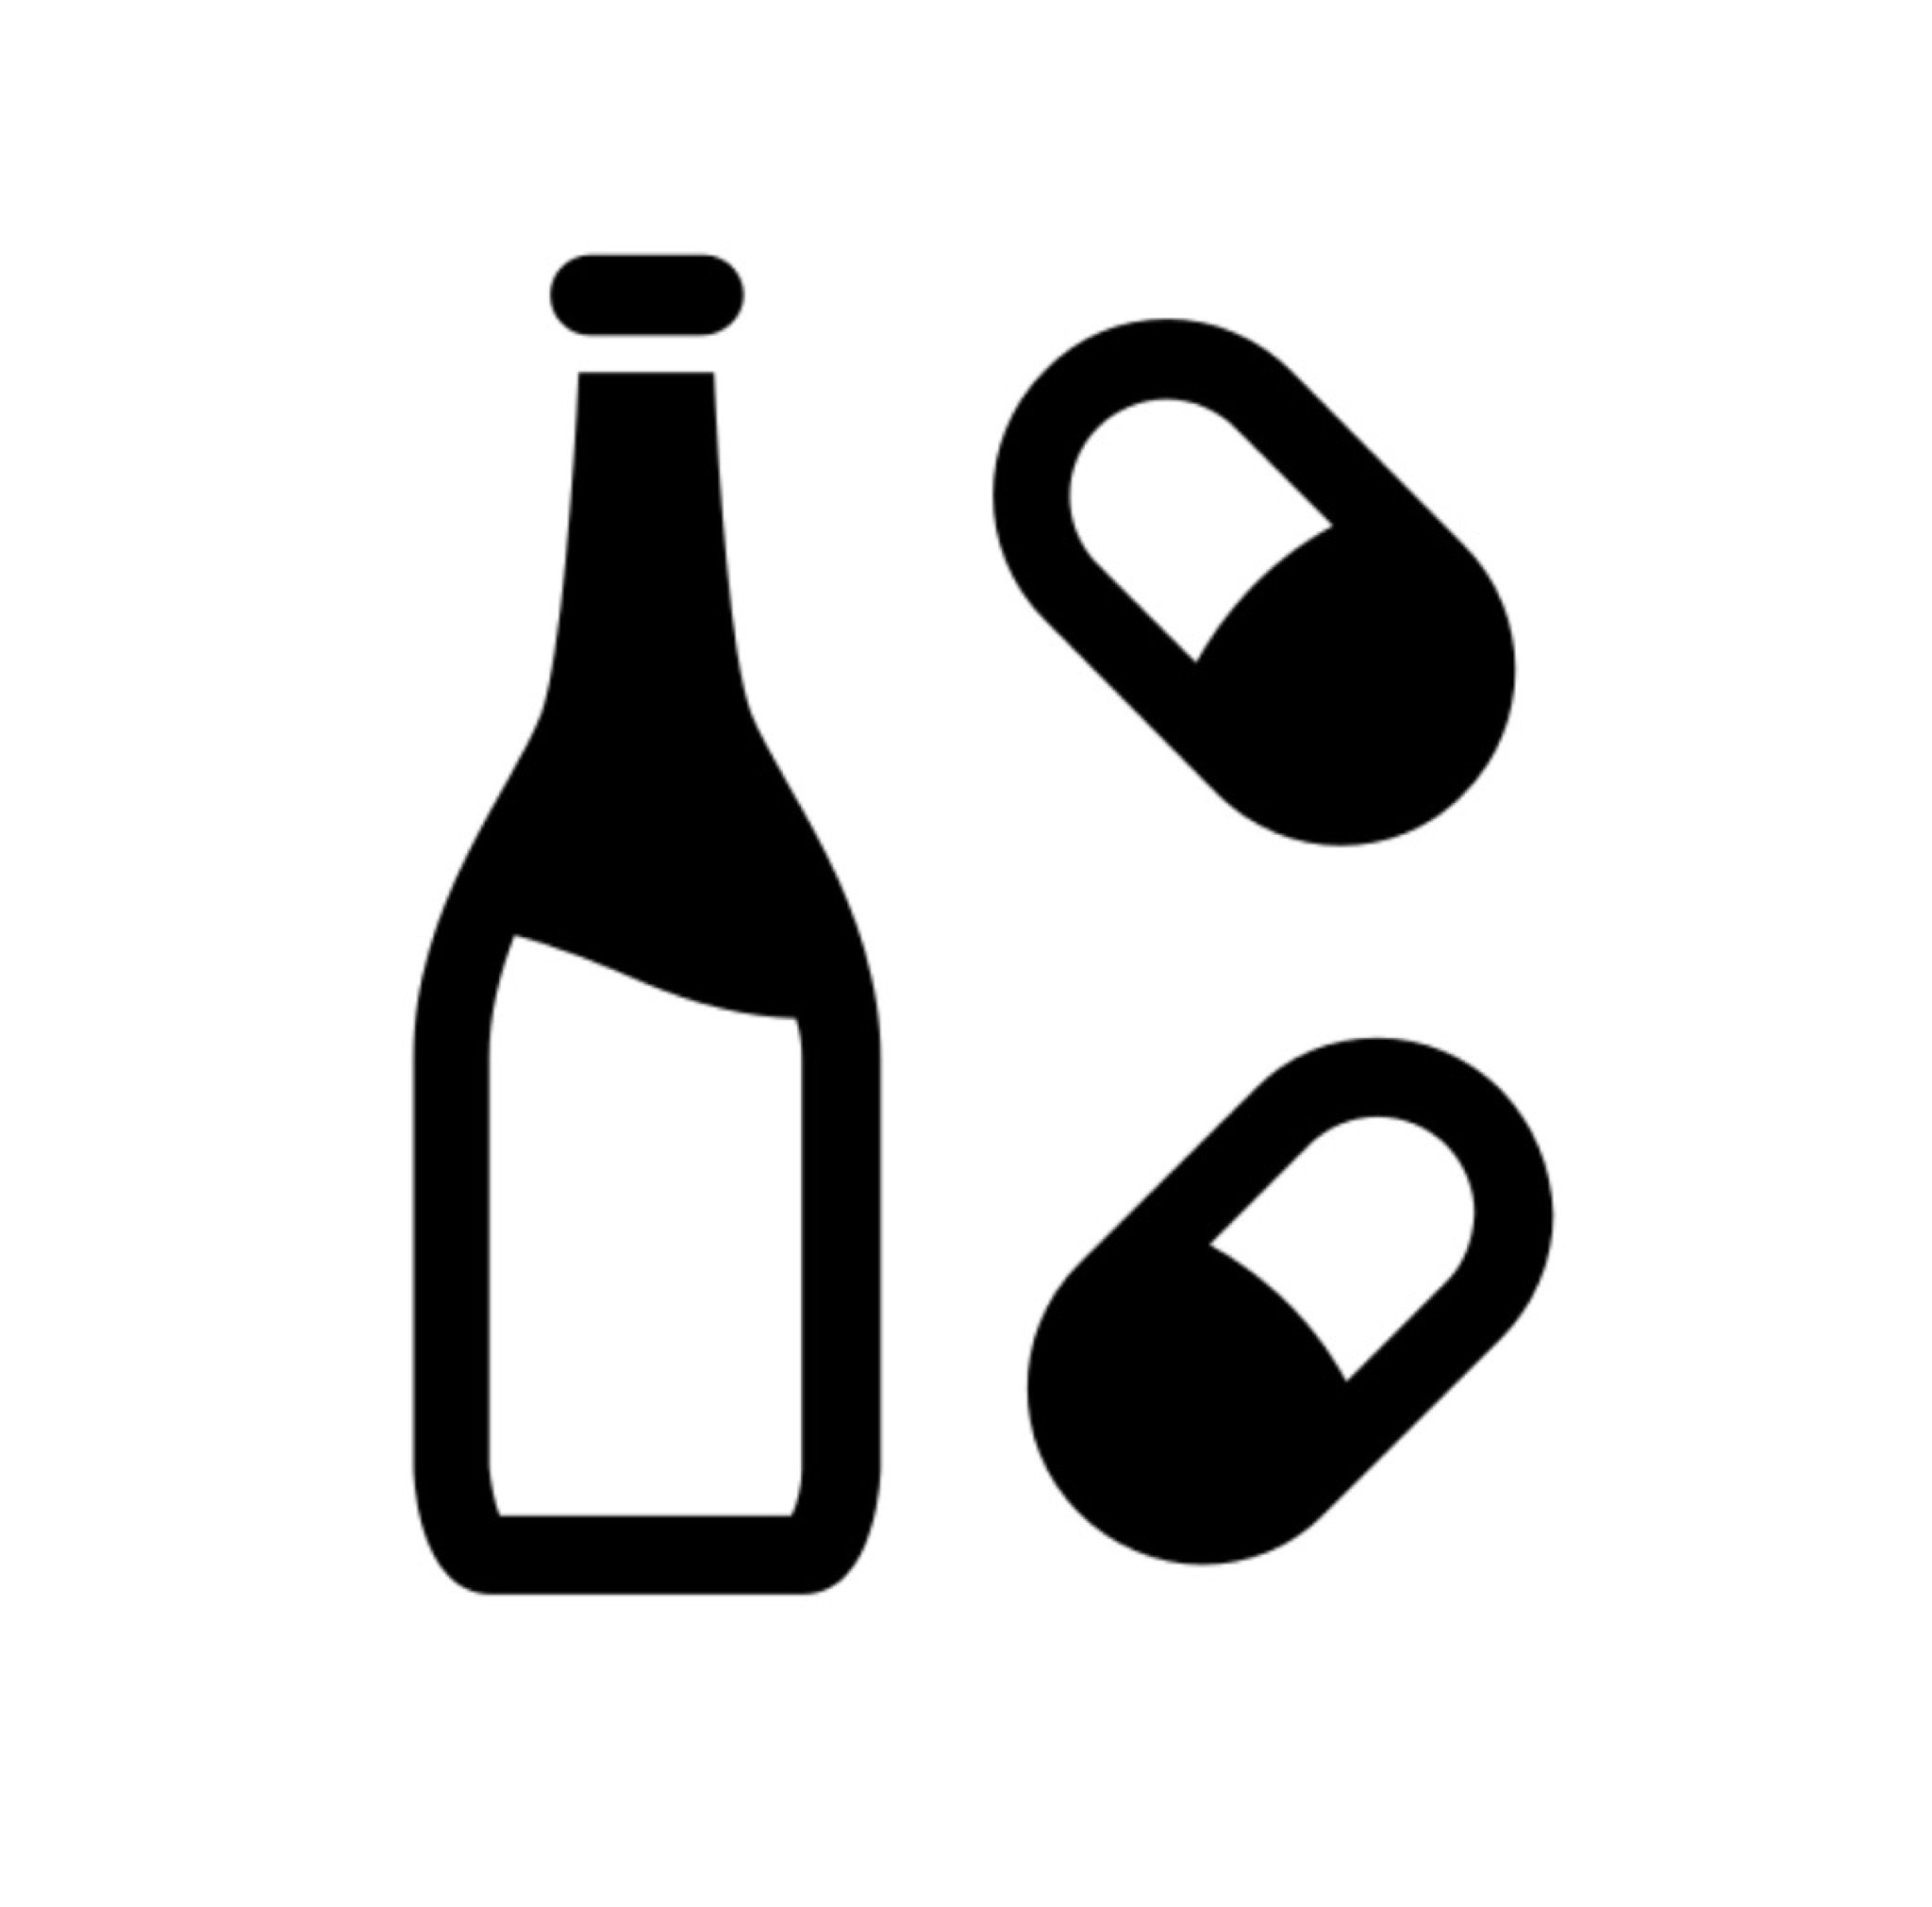 DRUGS &amp; ALCOHOL: Save intoxicating substances for the after-party! These don’t help us stay safe, so please don’t bring them along.